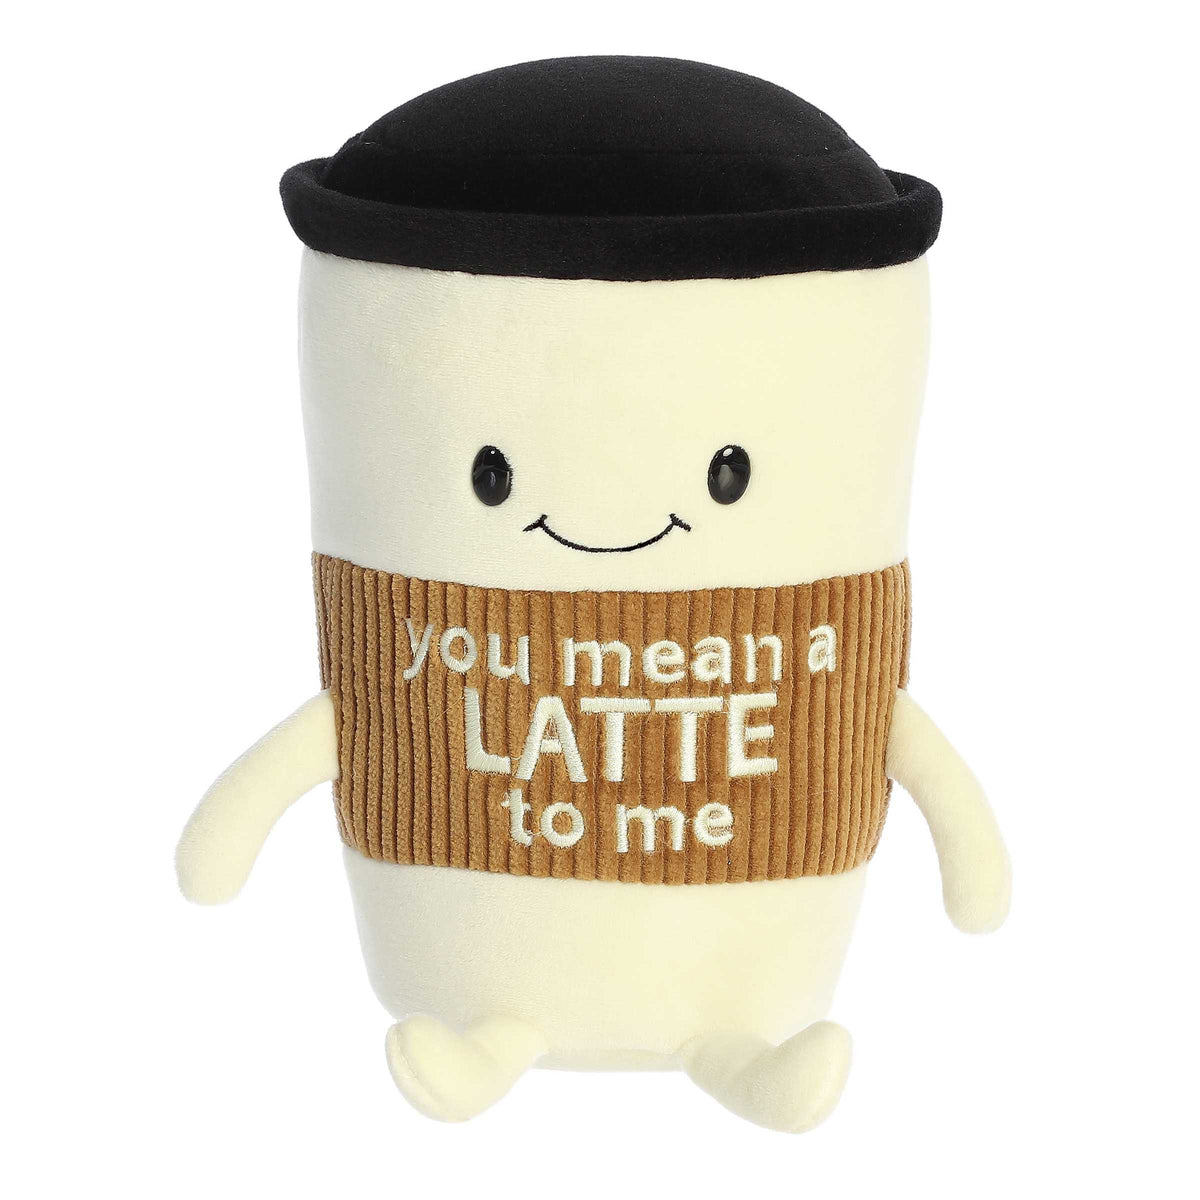 You Mean A Latte' plush, shaped like a coffee cup and adorned with puns, soft and whimsical